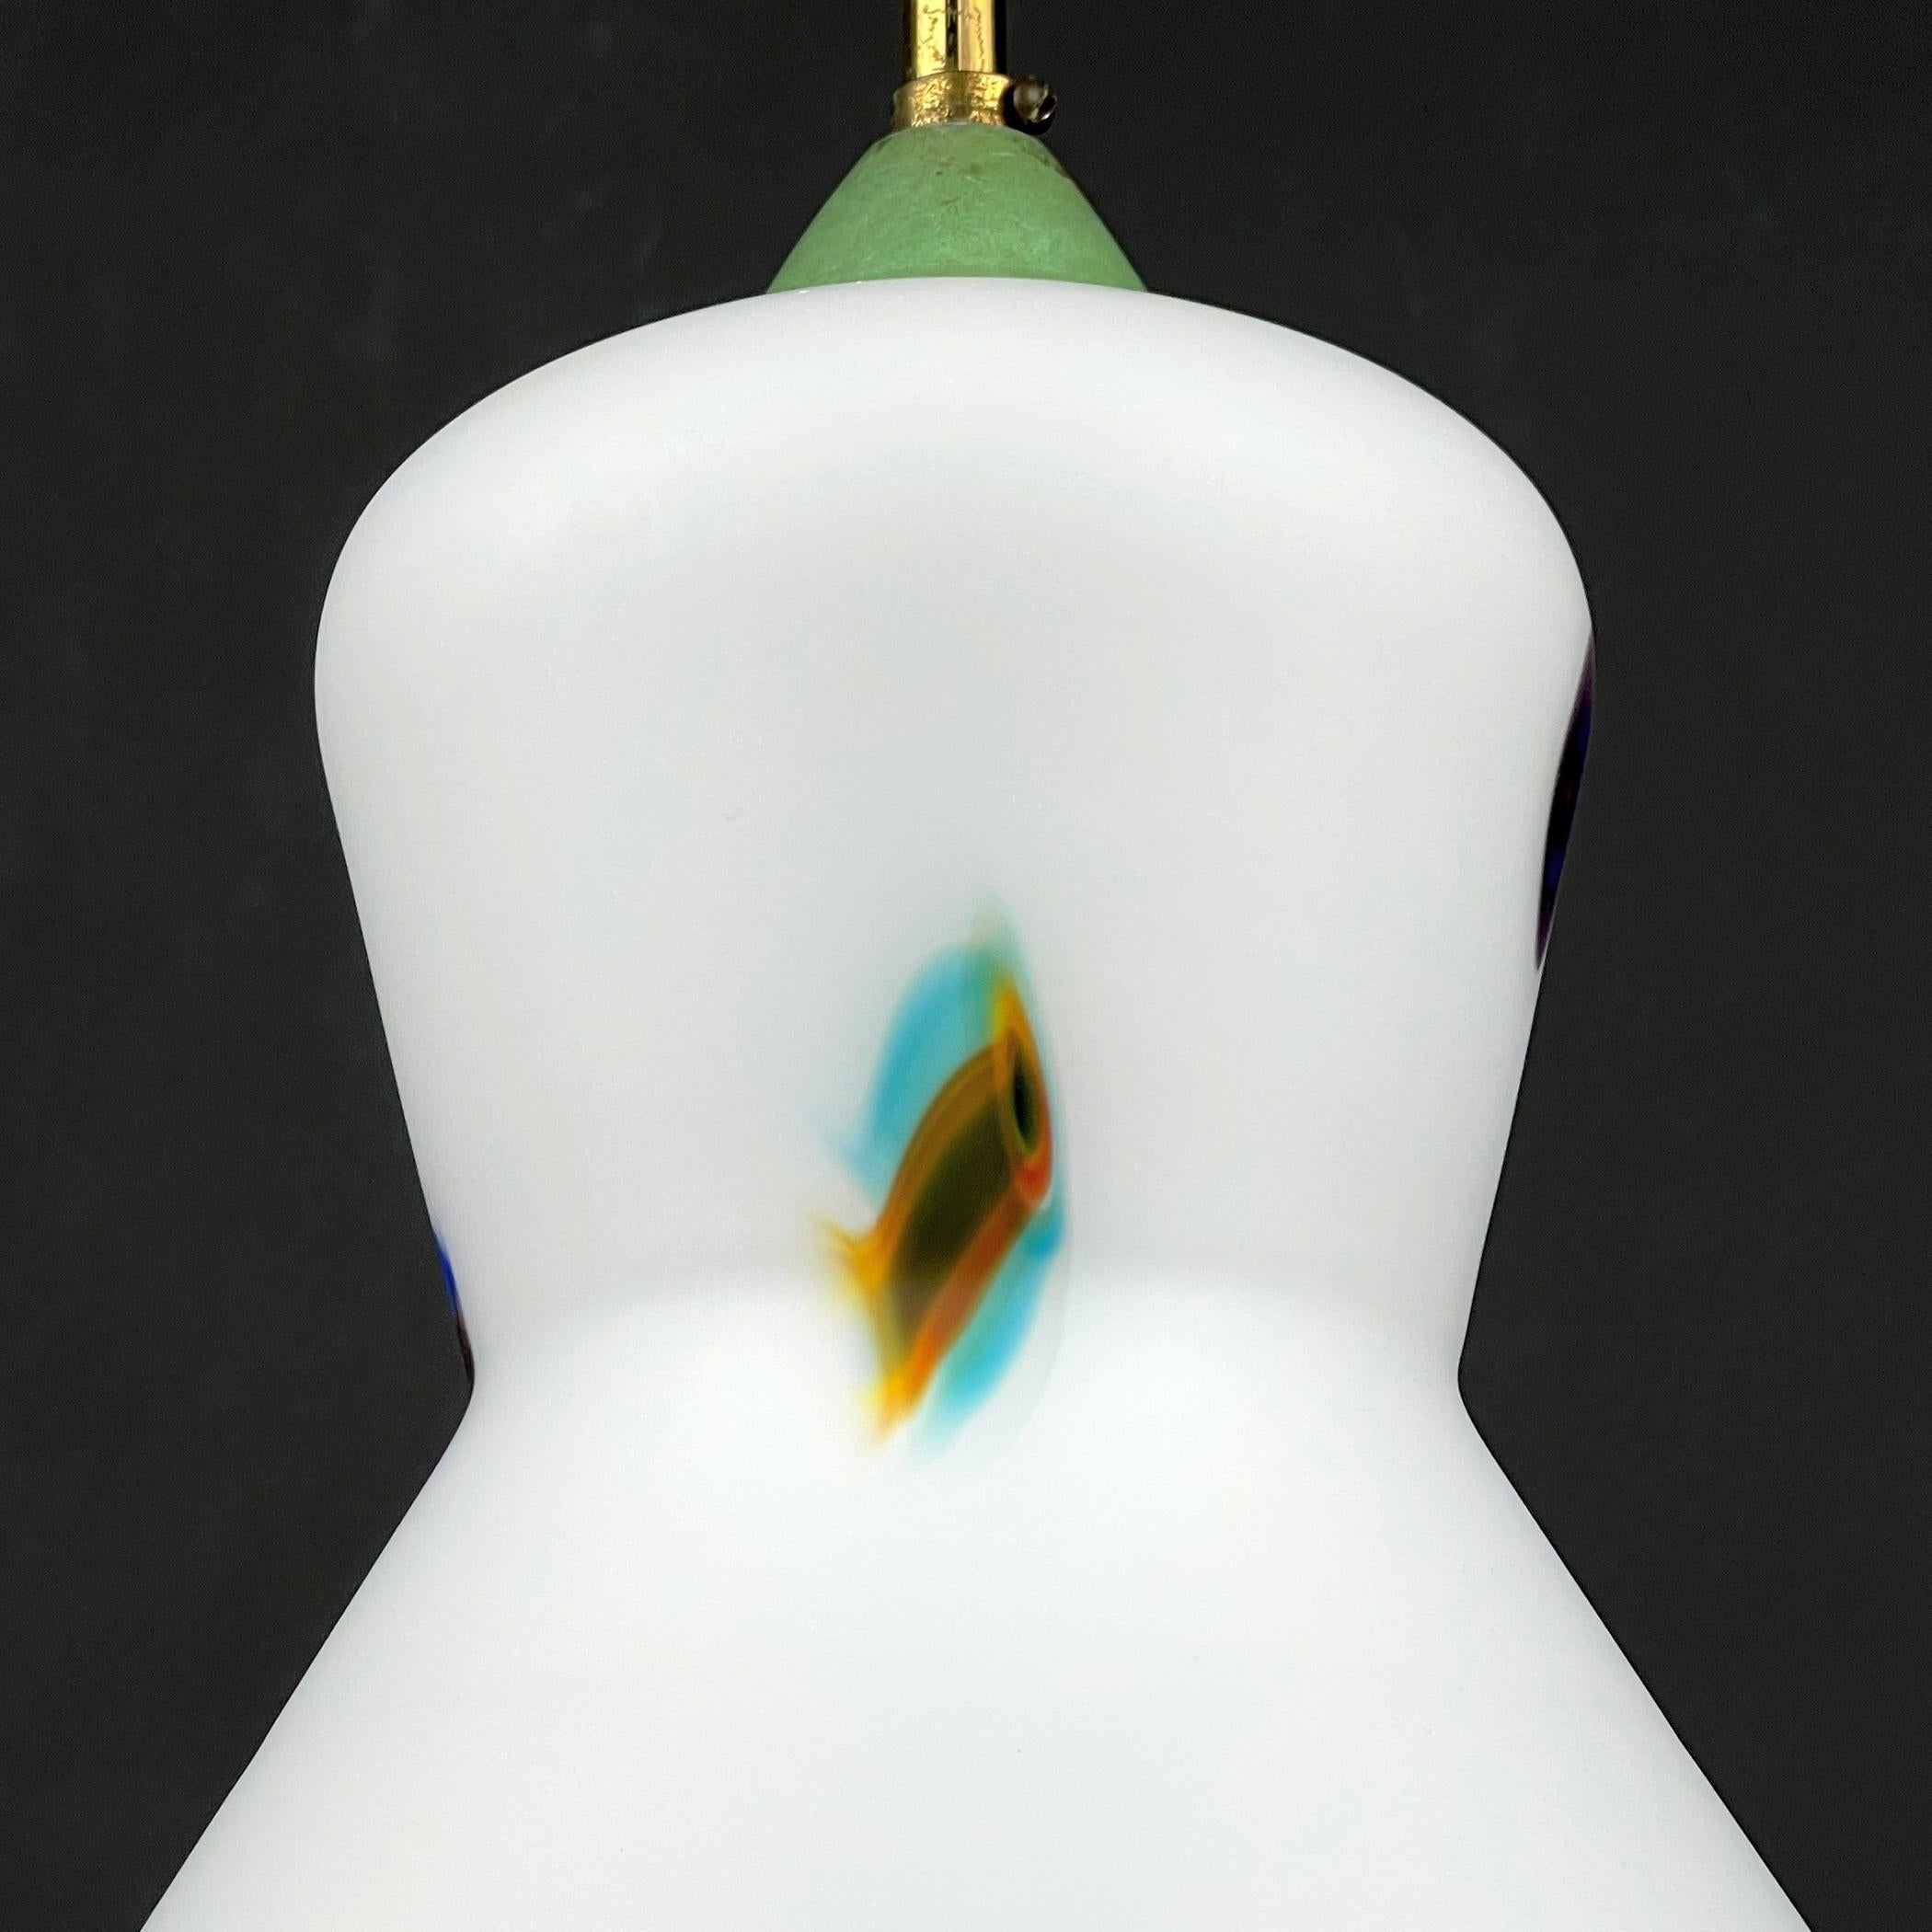 Midcentury Multicolor Opaline Murano Glass Pendant Lamp by Stilnovo Italy 1950s For Sale 8